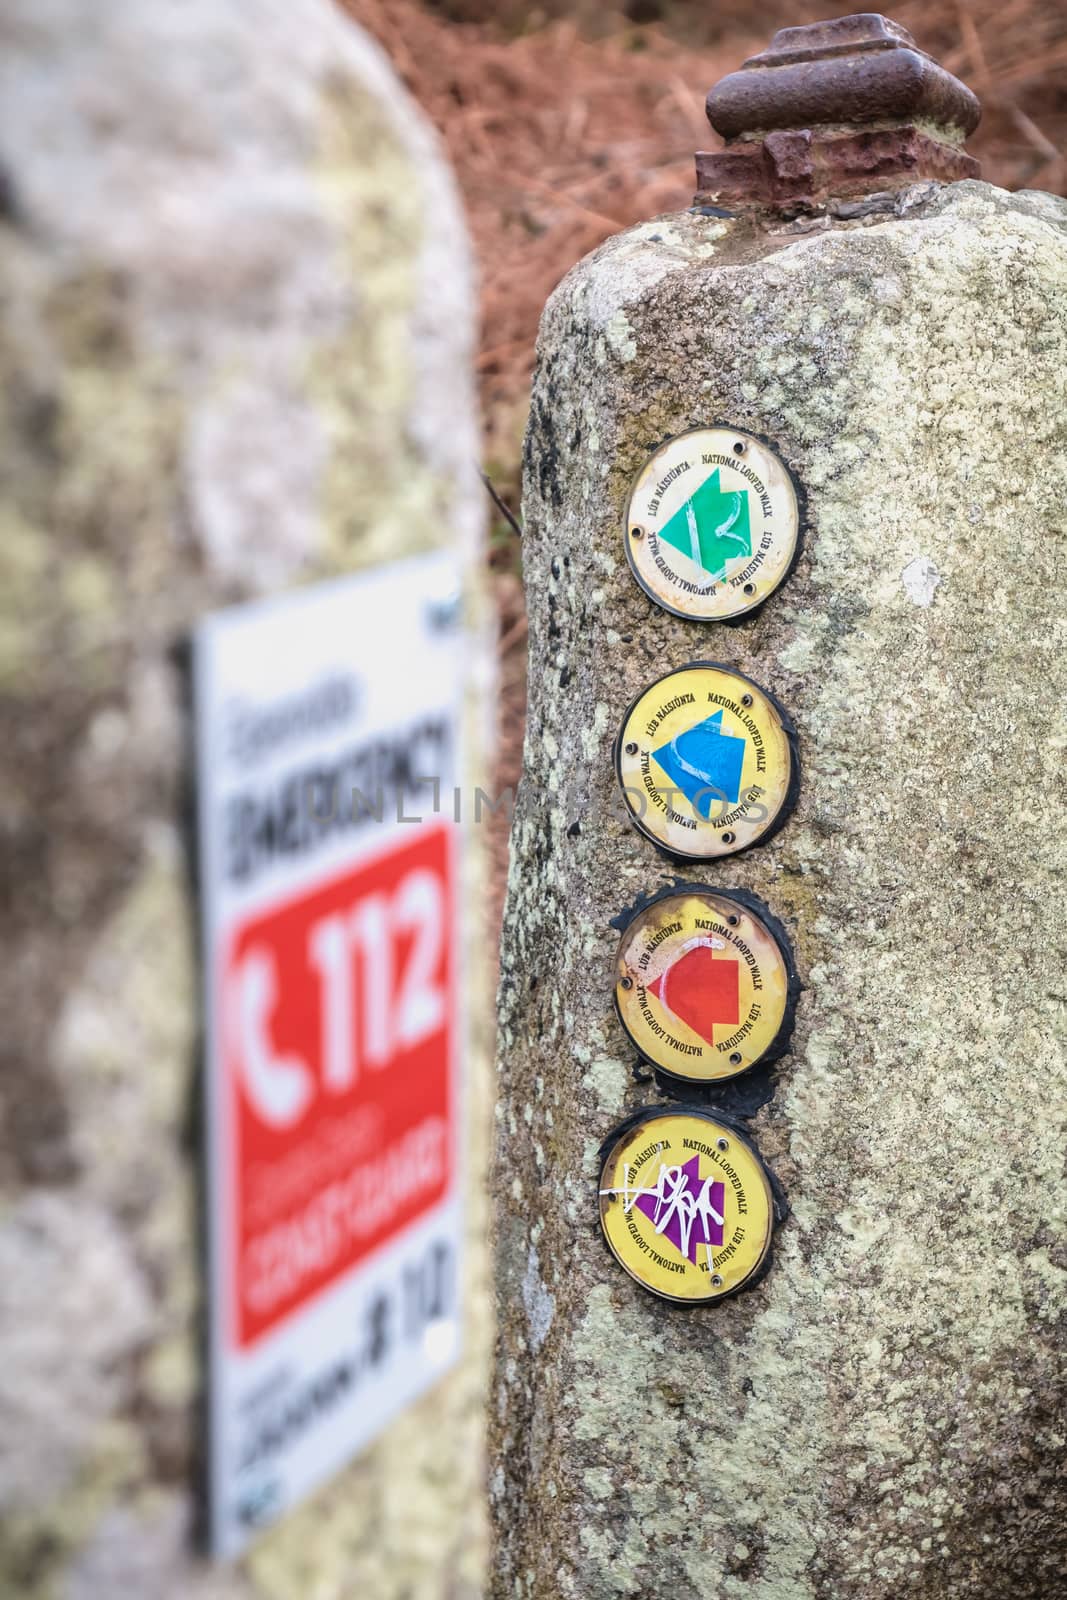 Howth near Dublin, Ireland - February 15, 2019: sign indicating the direction of hiking path circling the cliff on a winter day